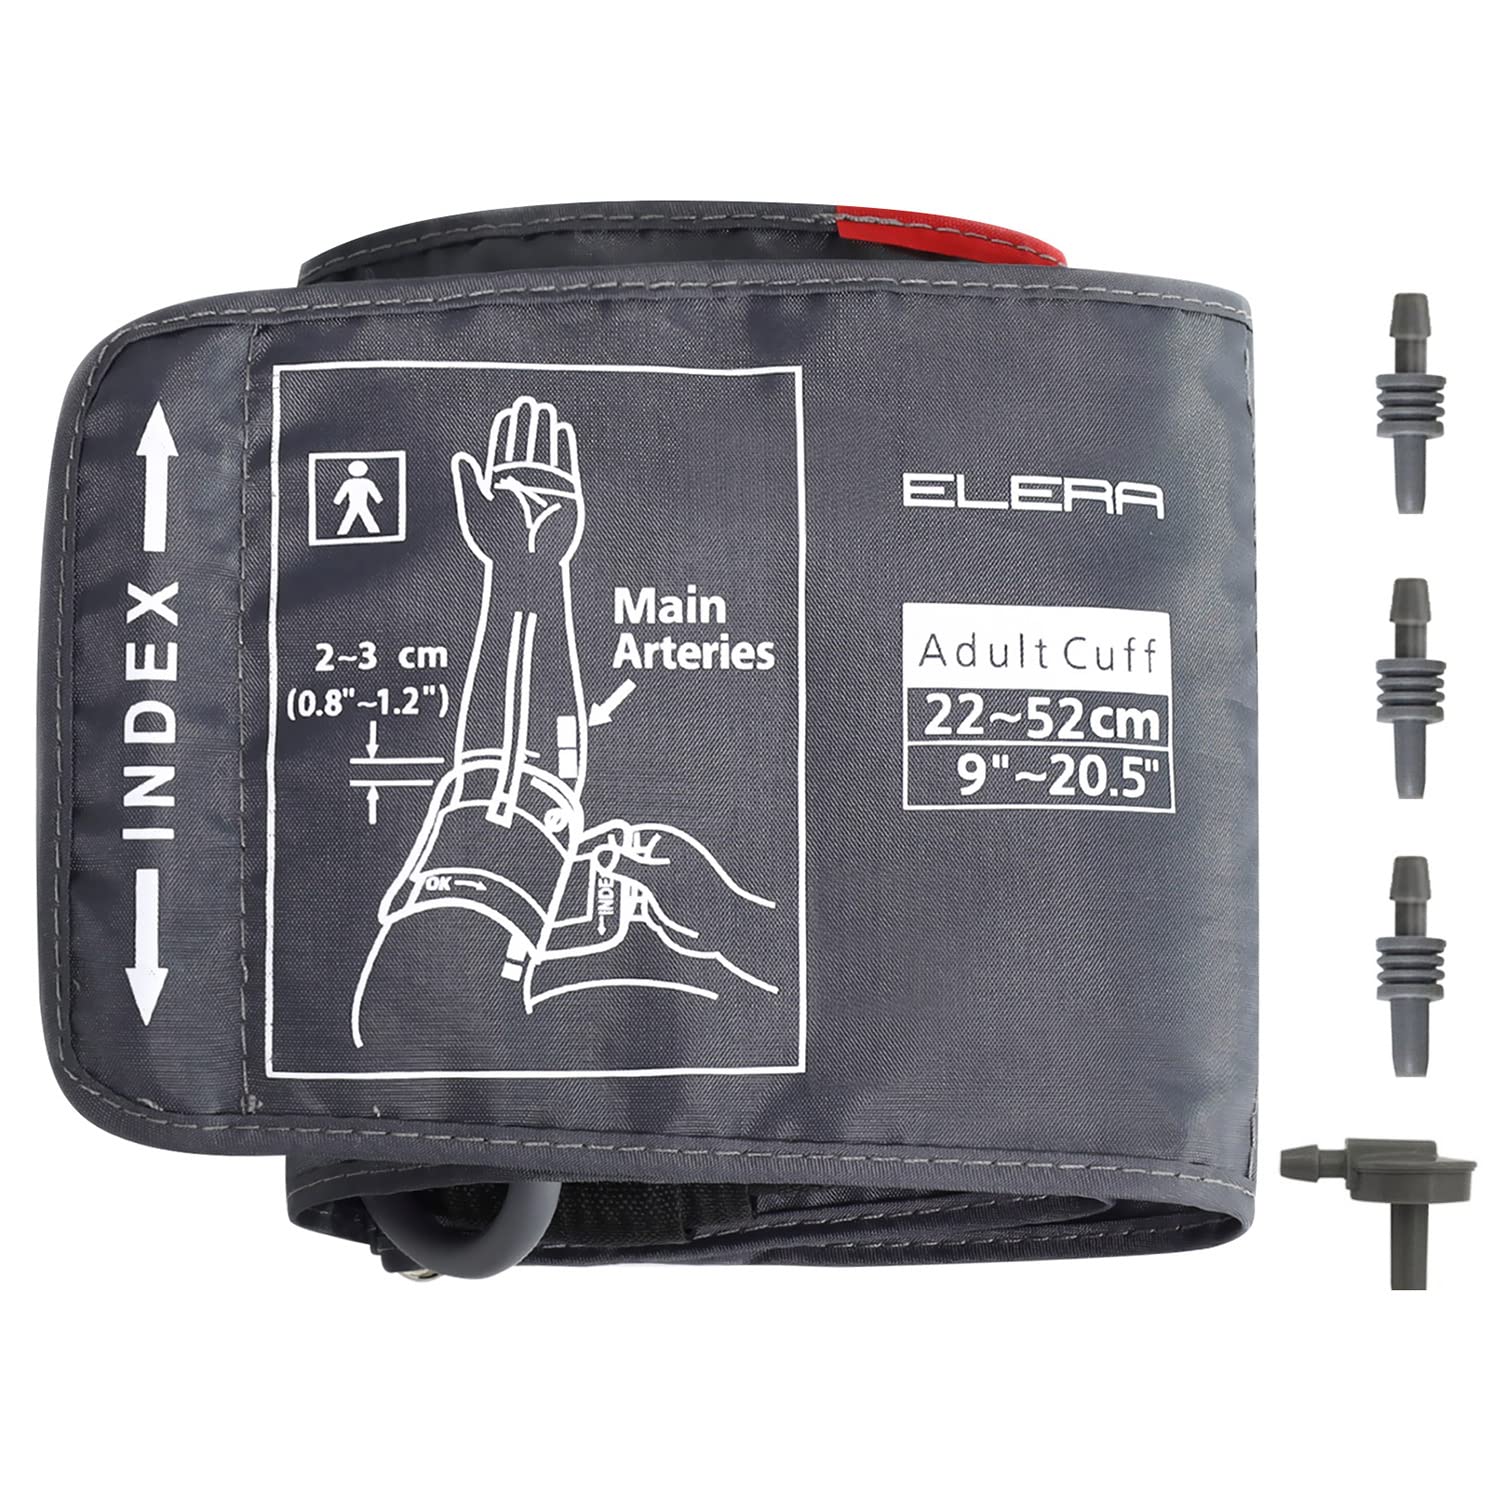 Extra Large Blood Pressure Cuff, ELERA 9-20.5 Inches (22-52CM) XL  Replacement Cuff for Big Arm, Compatible with Omron BP, Cuff Only